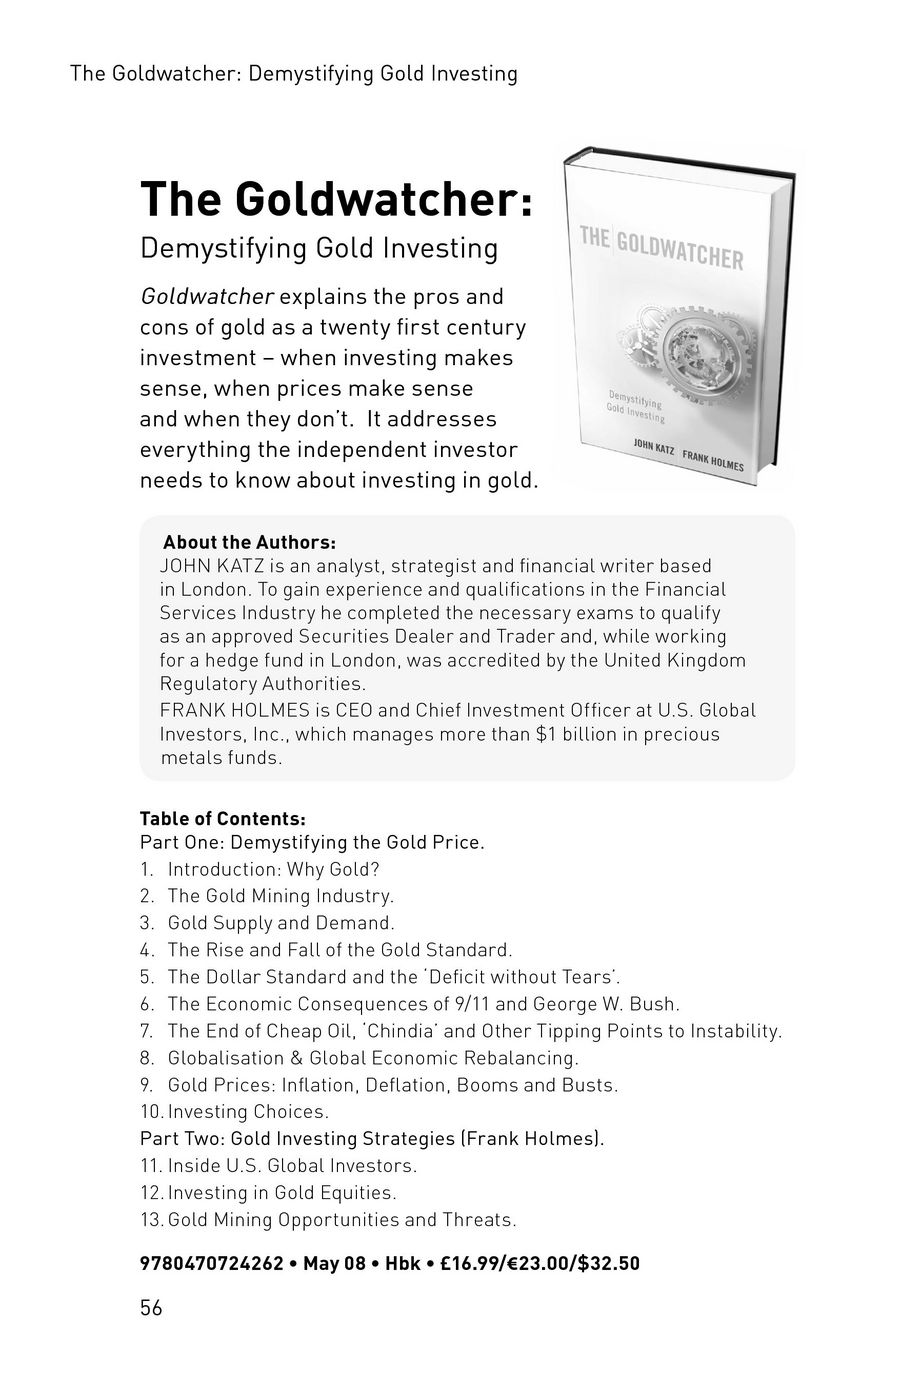 Demystifying Gold Investing The Goldwatcher